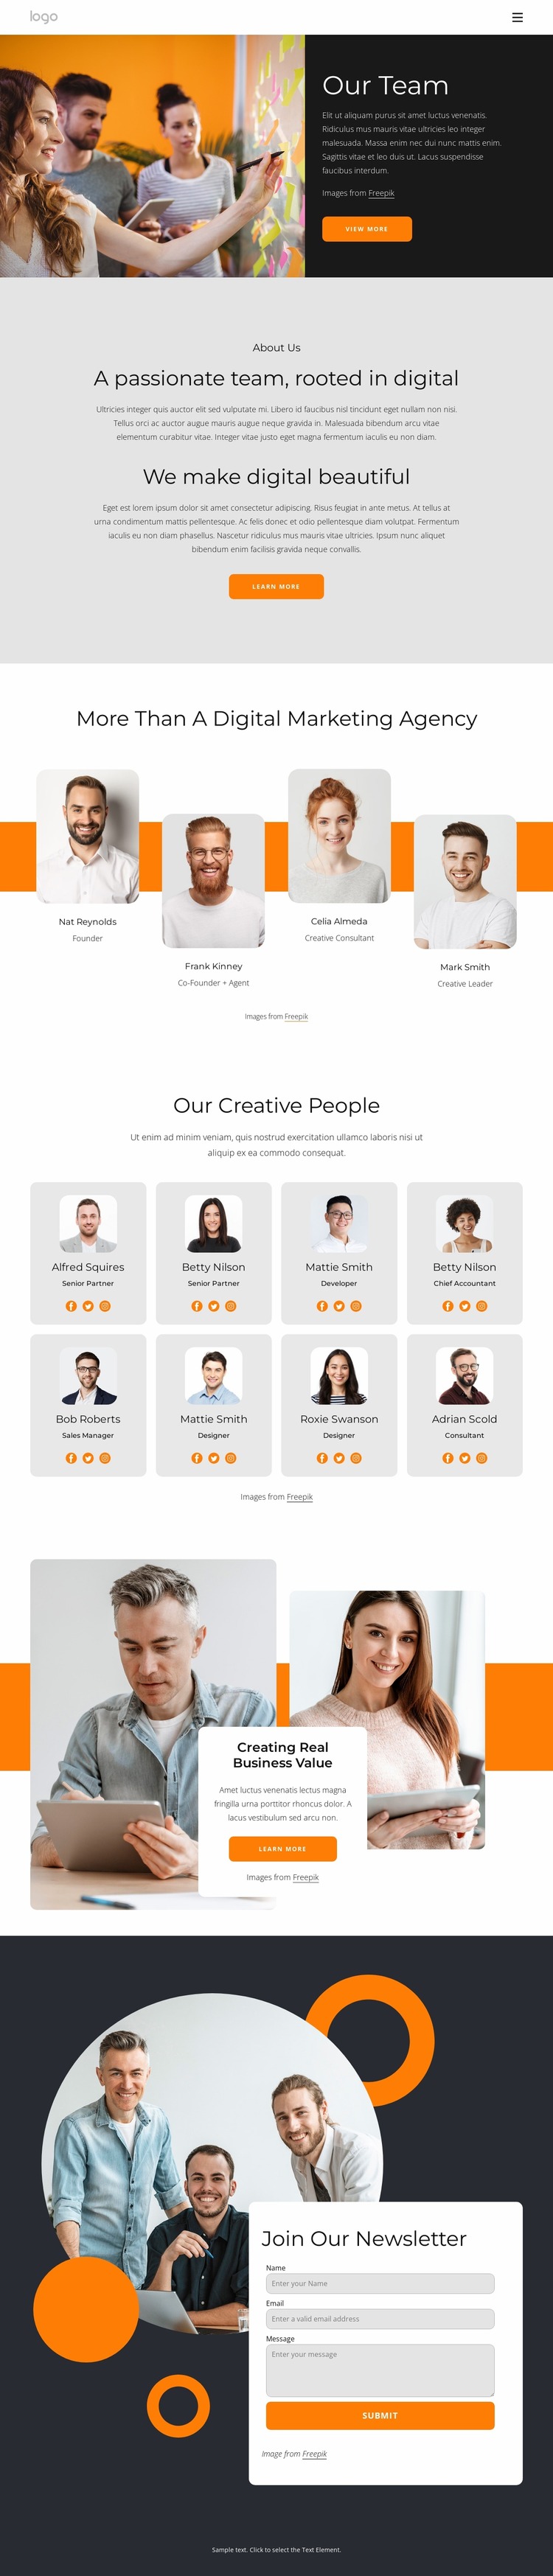 We are creative people with big dreams Html Website Builder